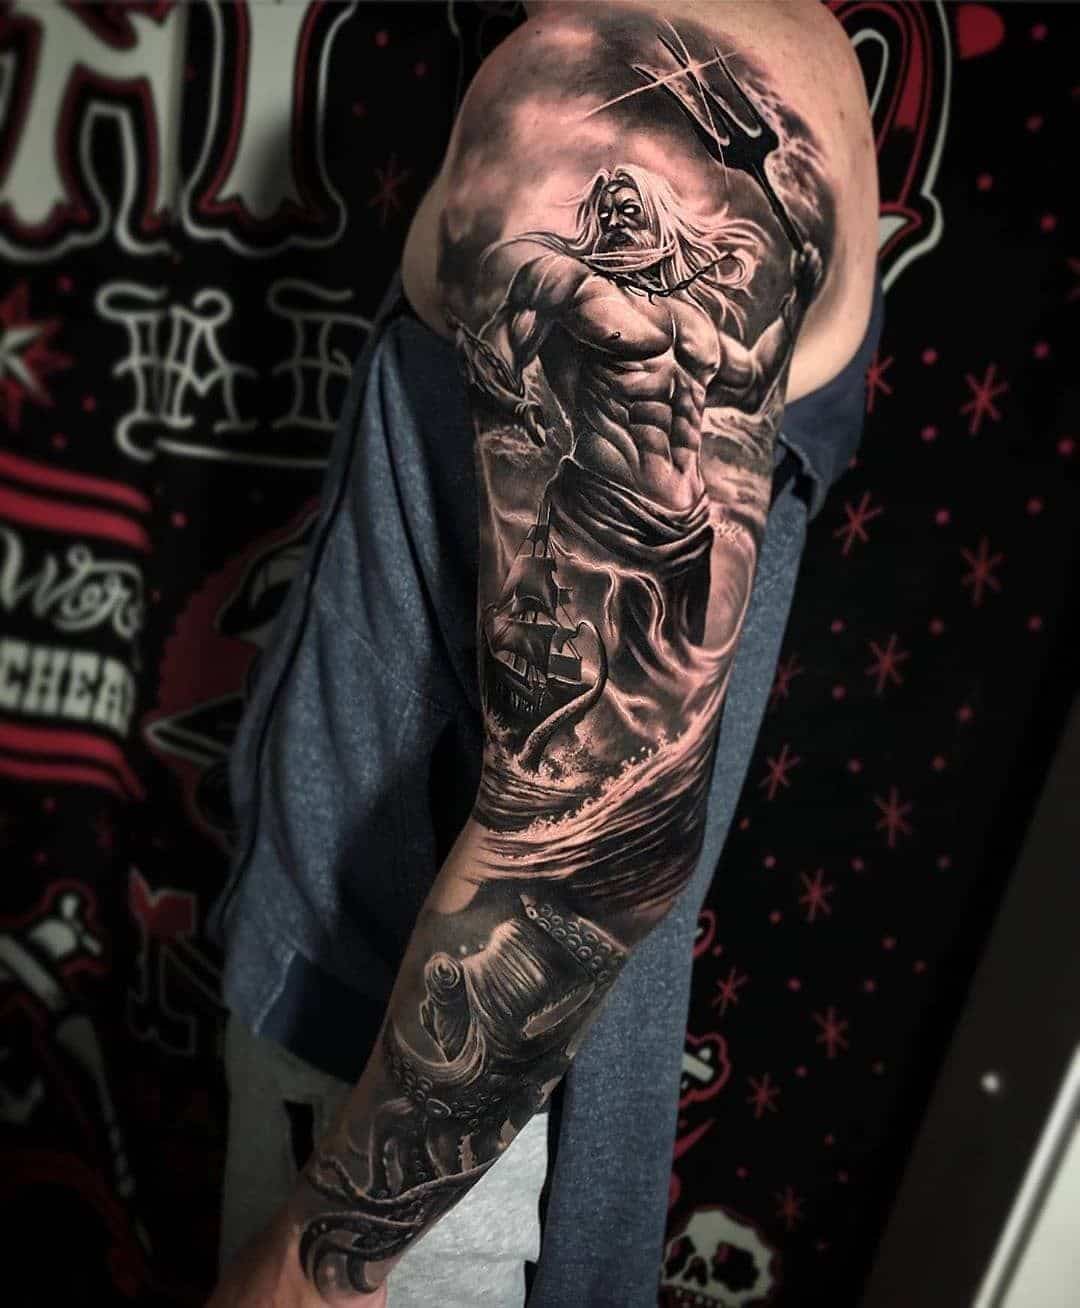 Zeus sleeve tattoo with ocean and octopus. 